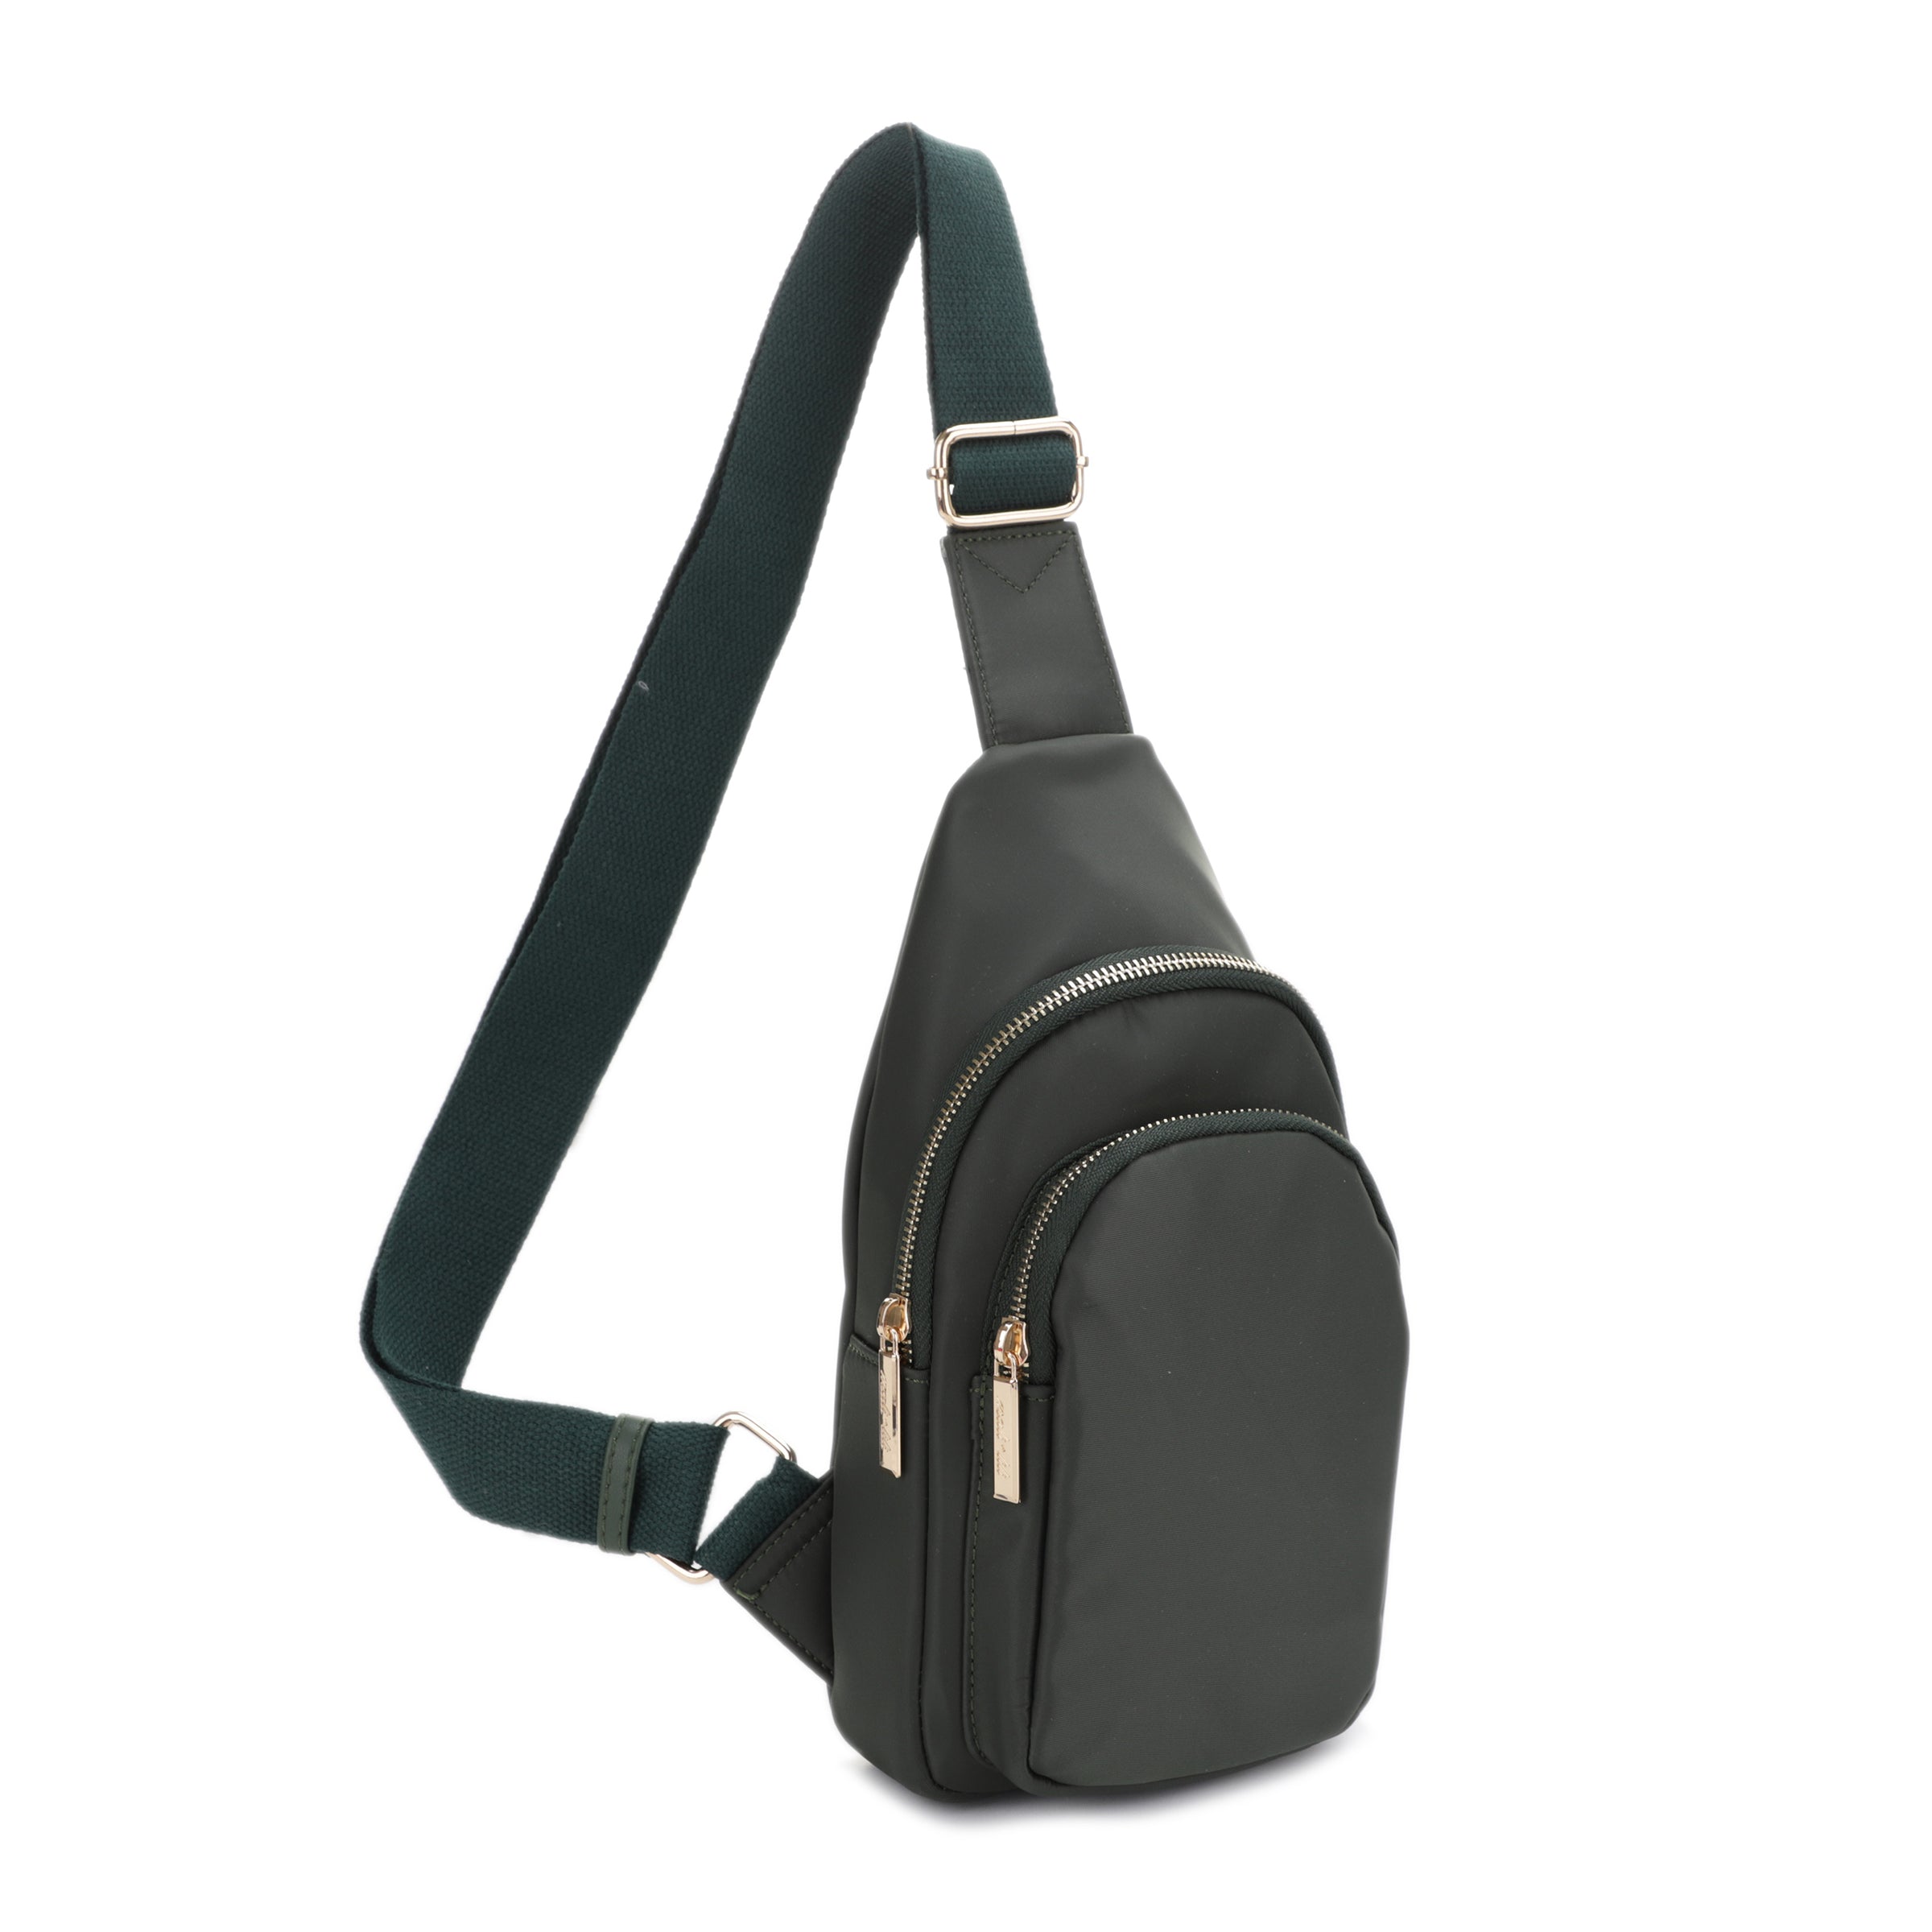 Up To 74% Off on Unisex Crossbody Chest Sling ... | Groupon Goods